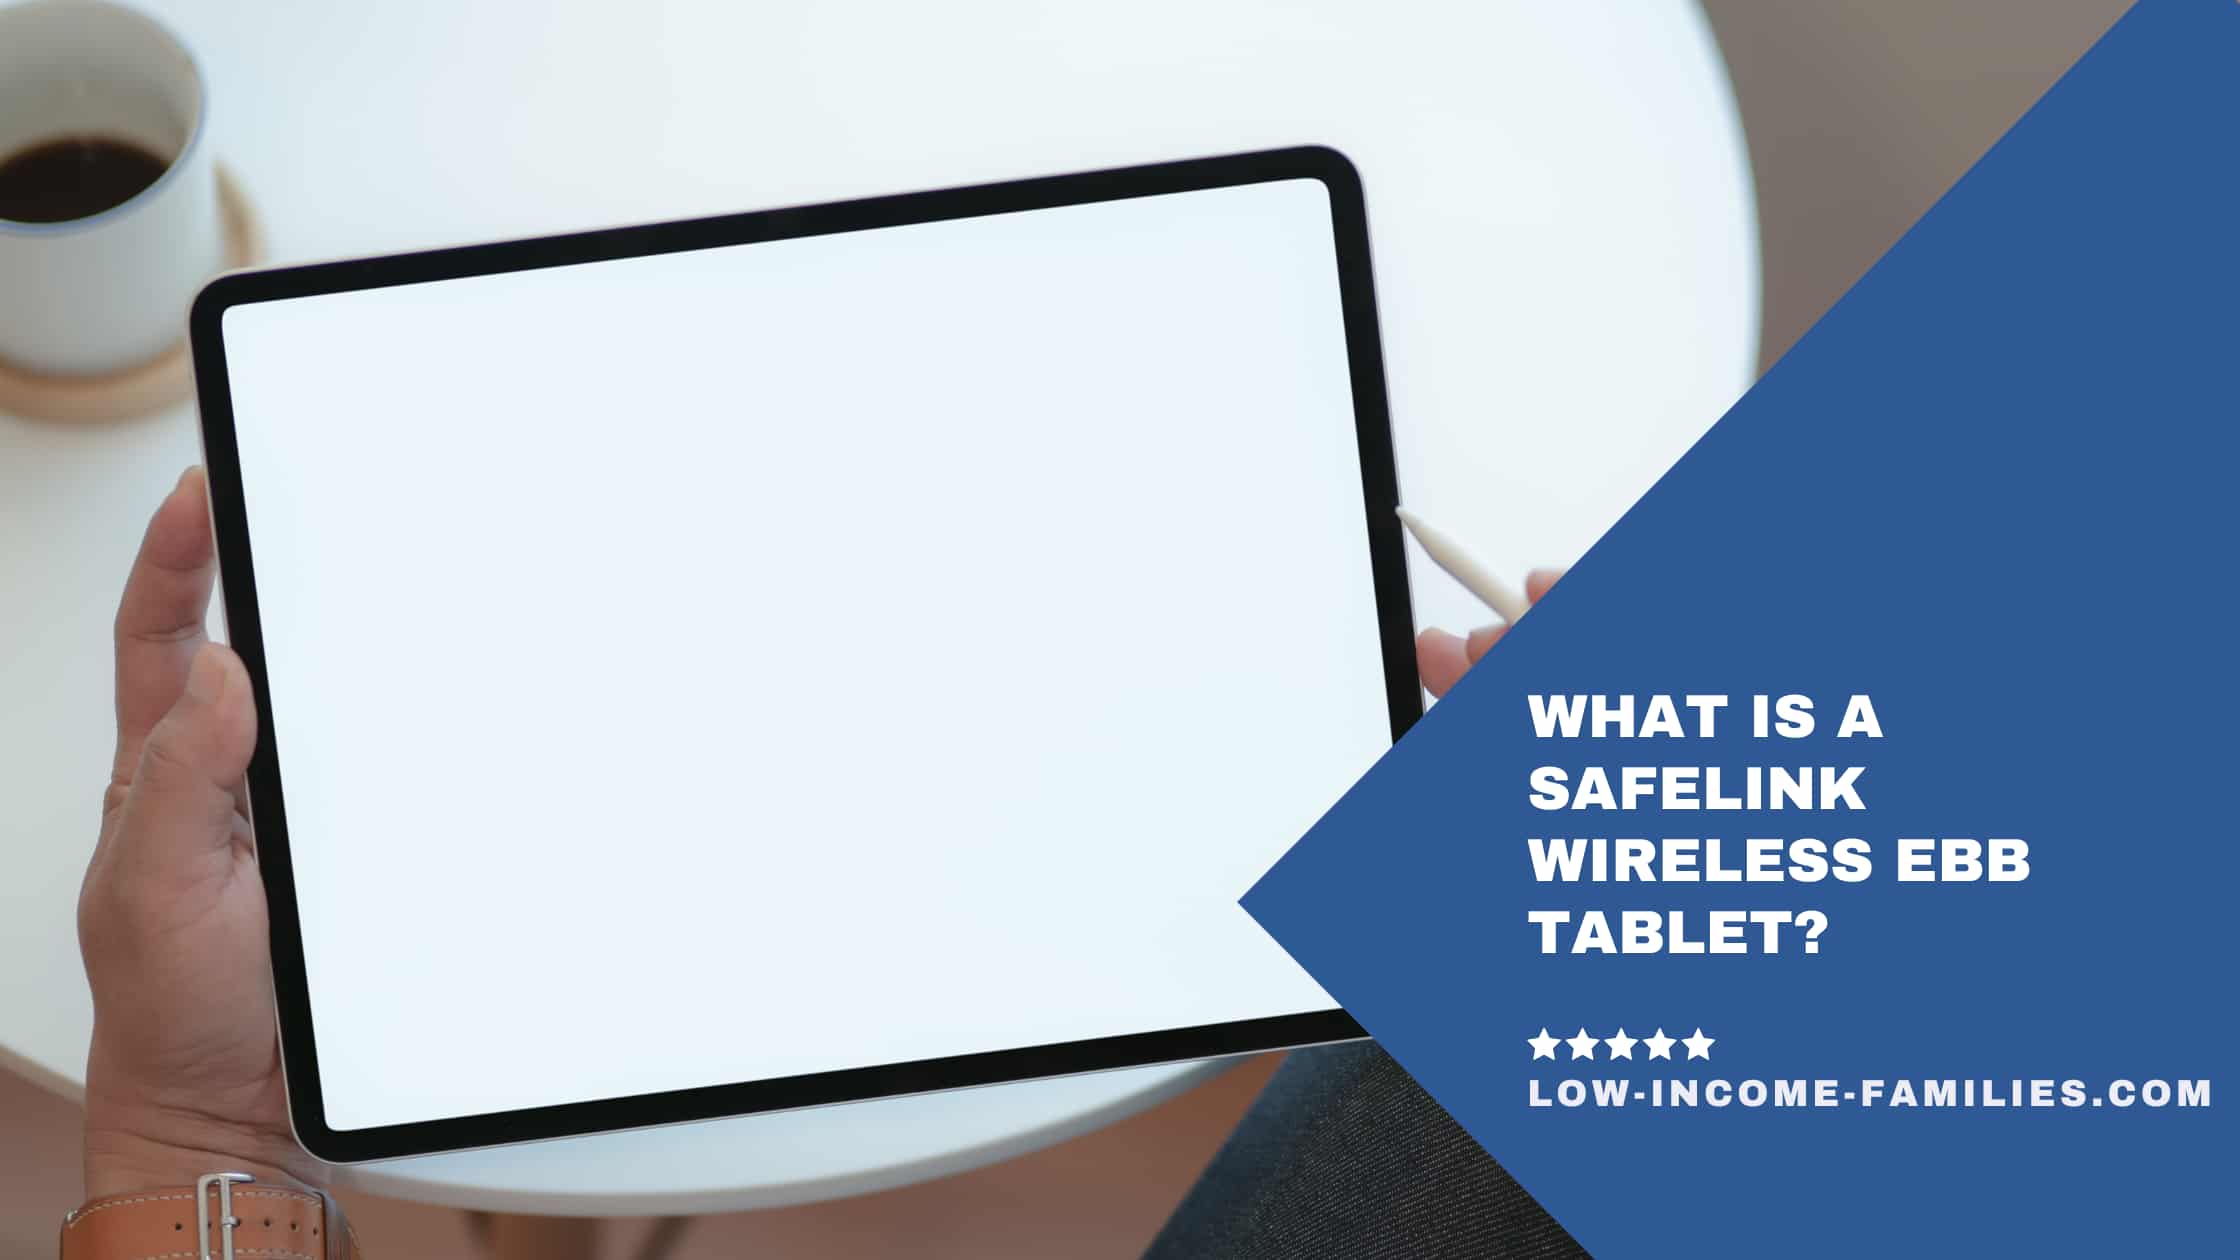 What Is a Safelink Wireless EBB Tablet?